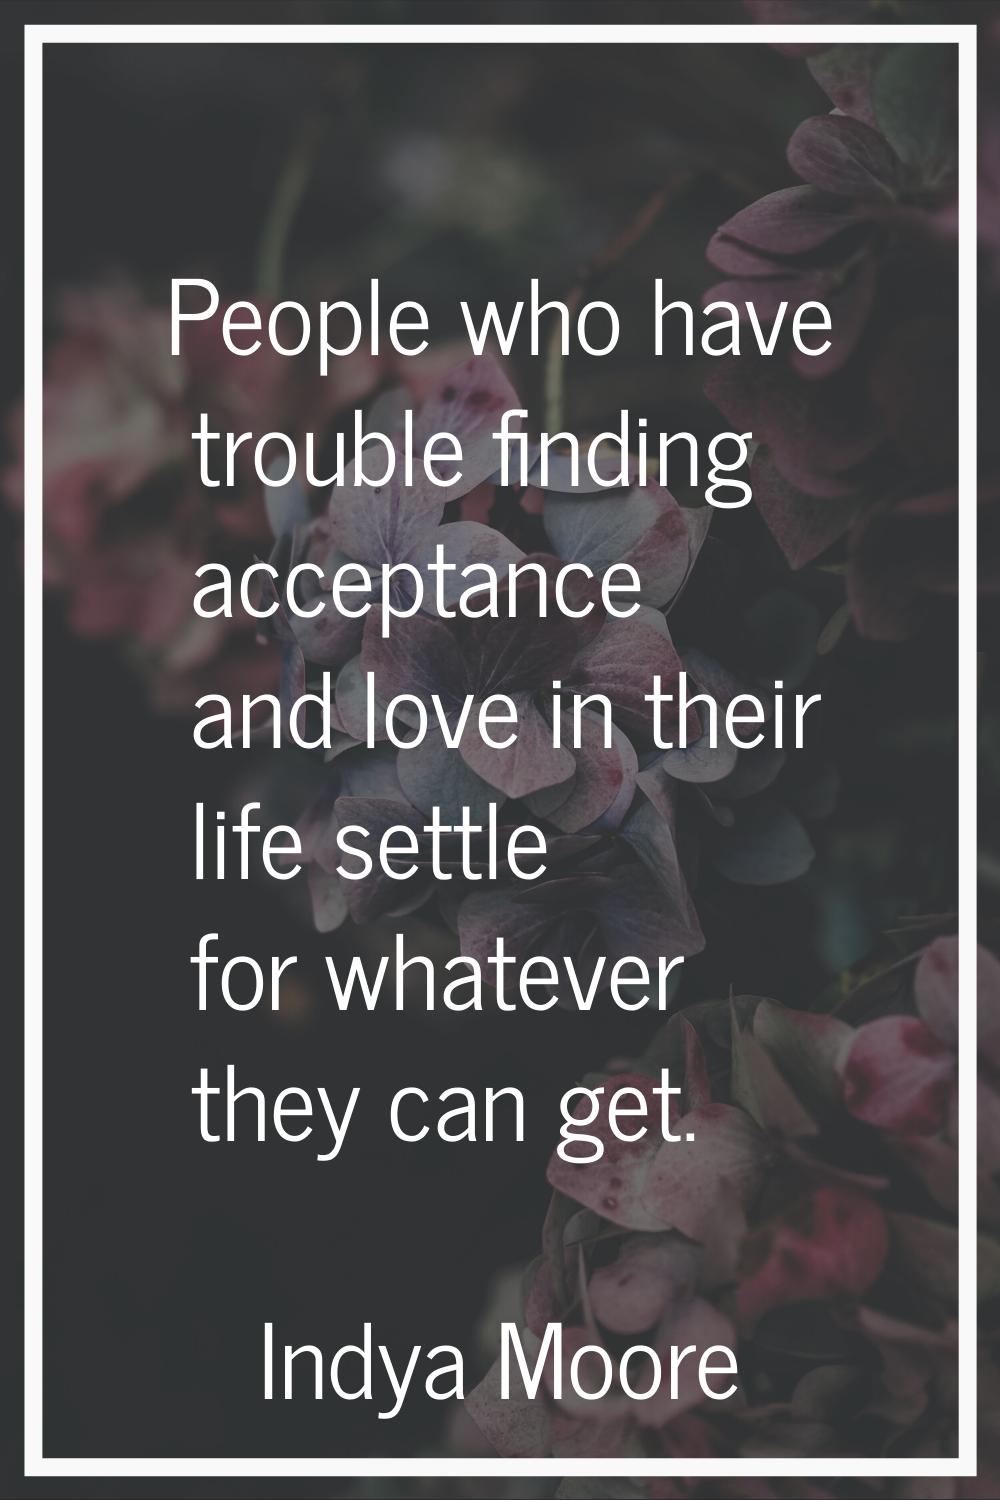 People who have trouble finding acceptance and love in their life settle for whatever they can get.